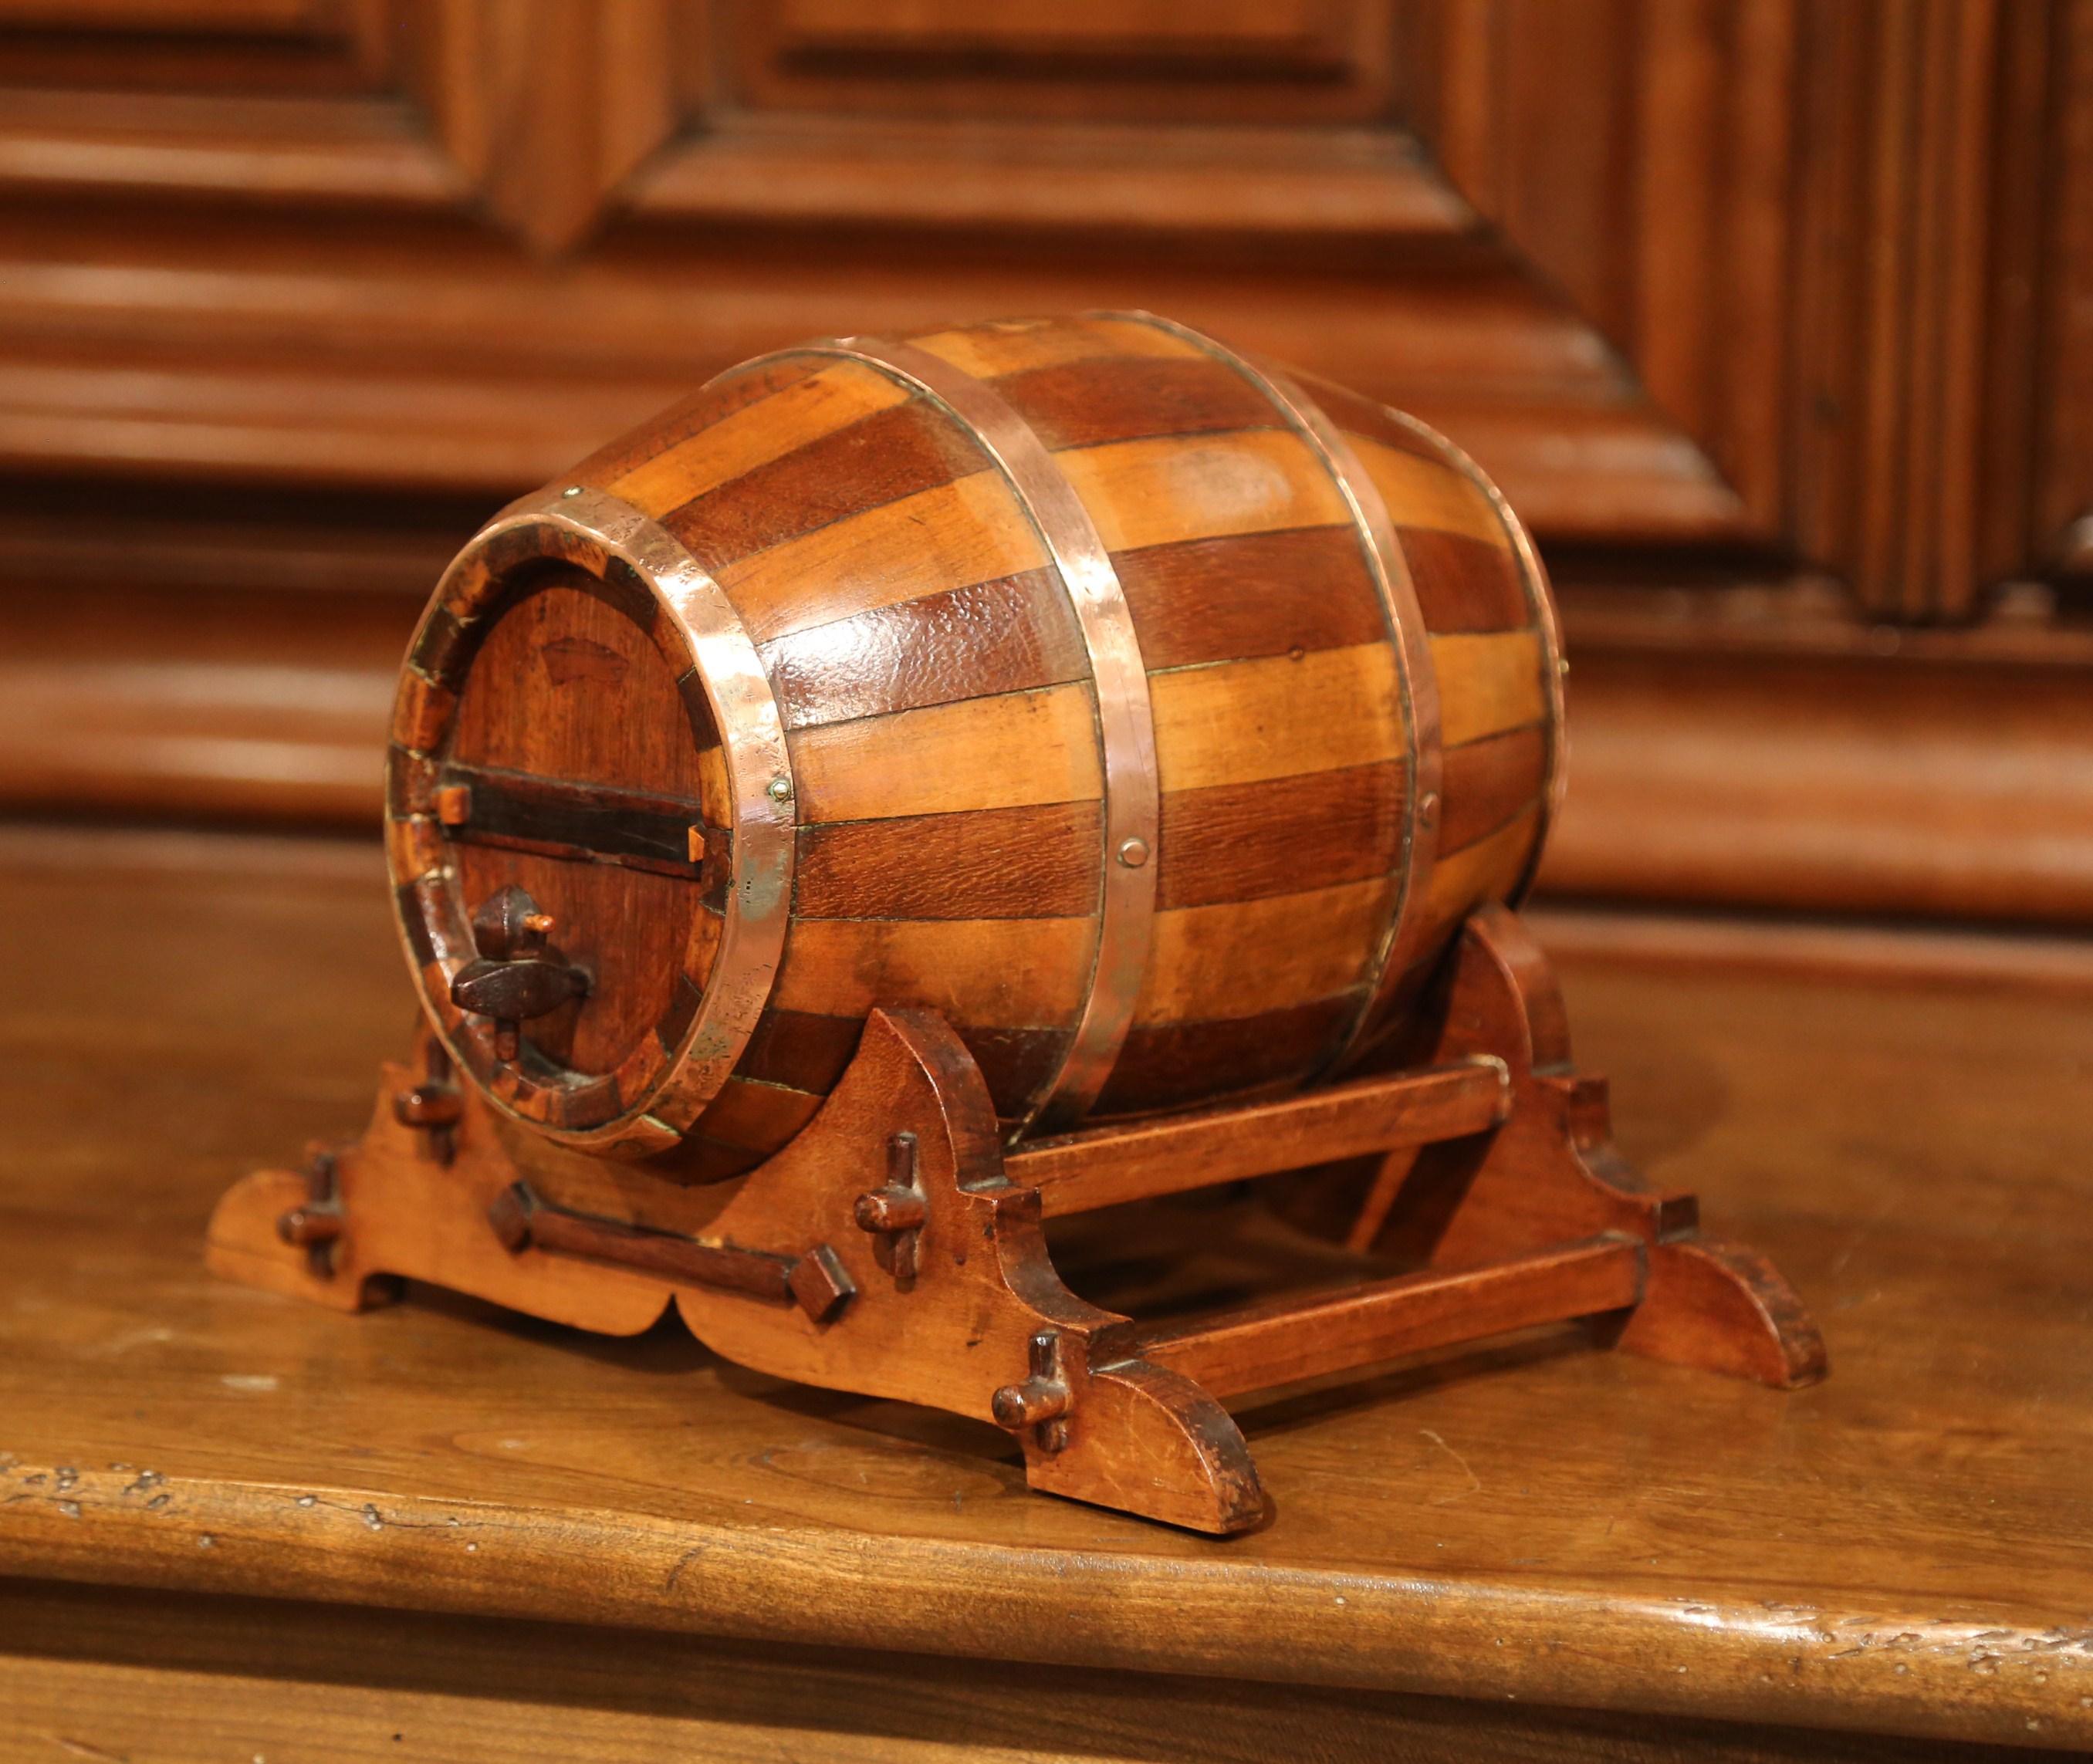 Accessorize your wet bar with this antique, decorative fruit wood and oak barrel sculpture. Crafted in Cognac circa 1930, the barrel is secured on stand and flaunts a beautiful walnut patina. The oval wood barrel features brass rims and decorative